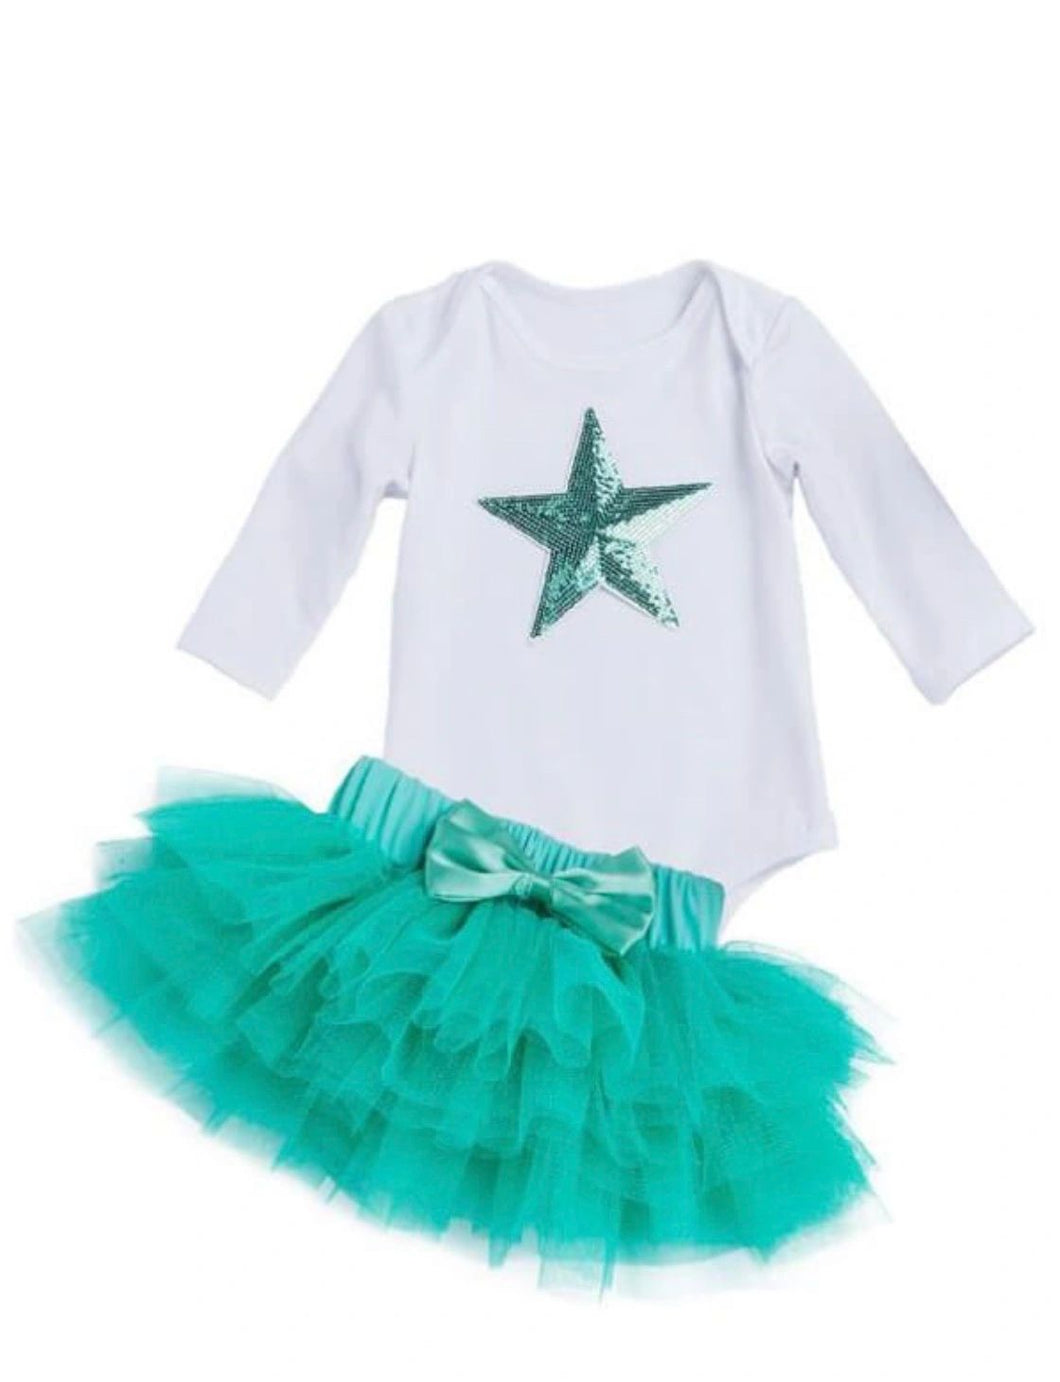 Long sleeve star romper with green tutu